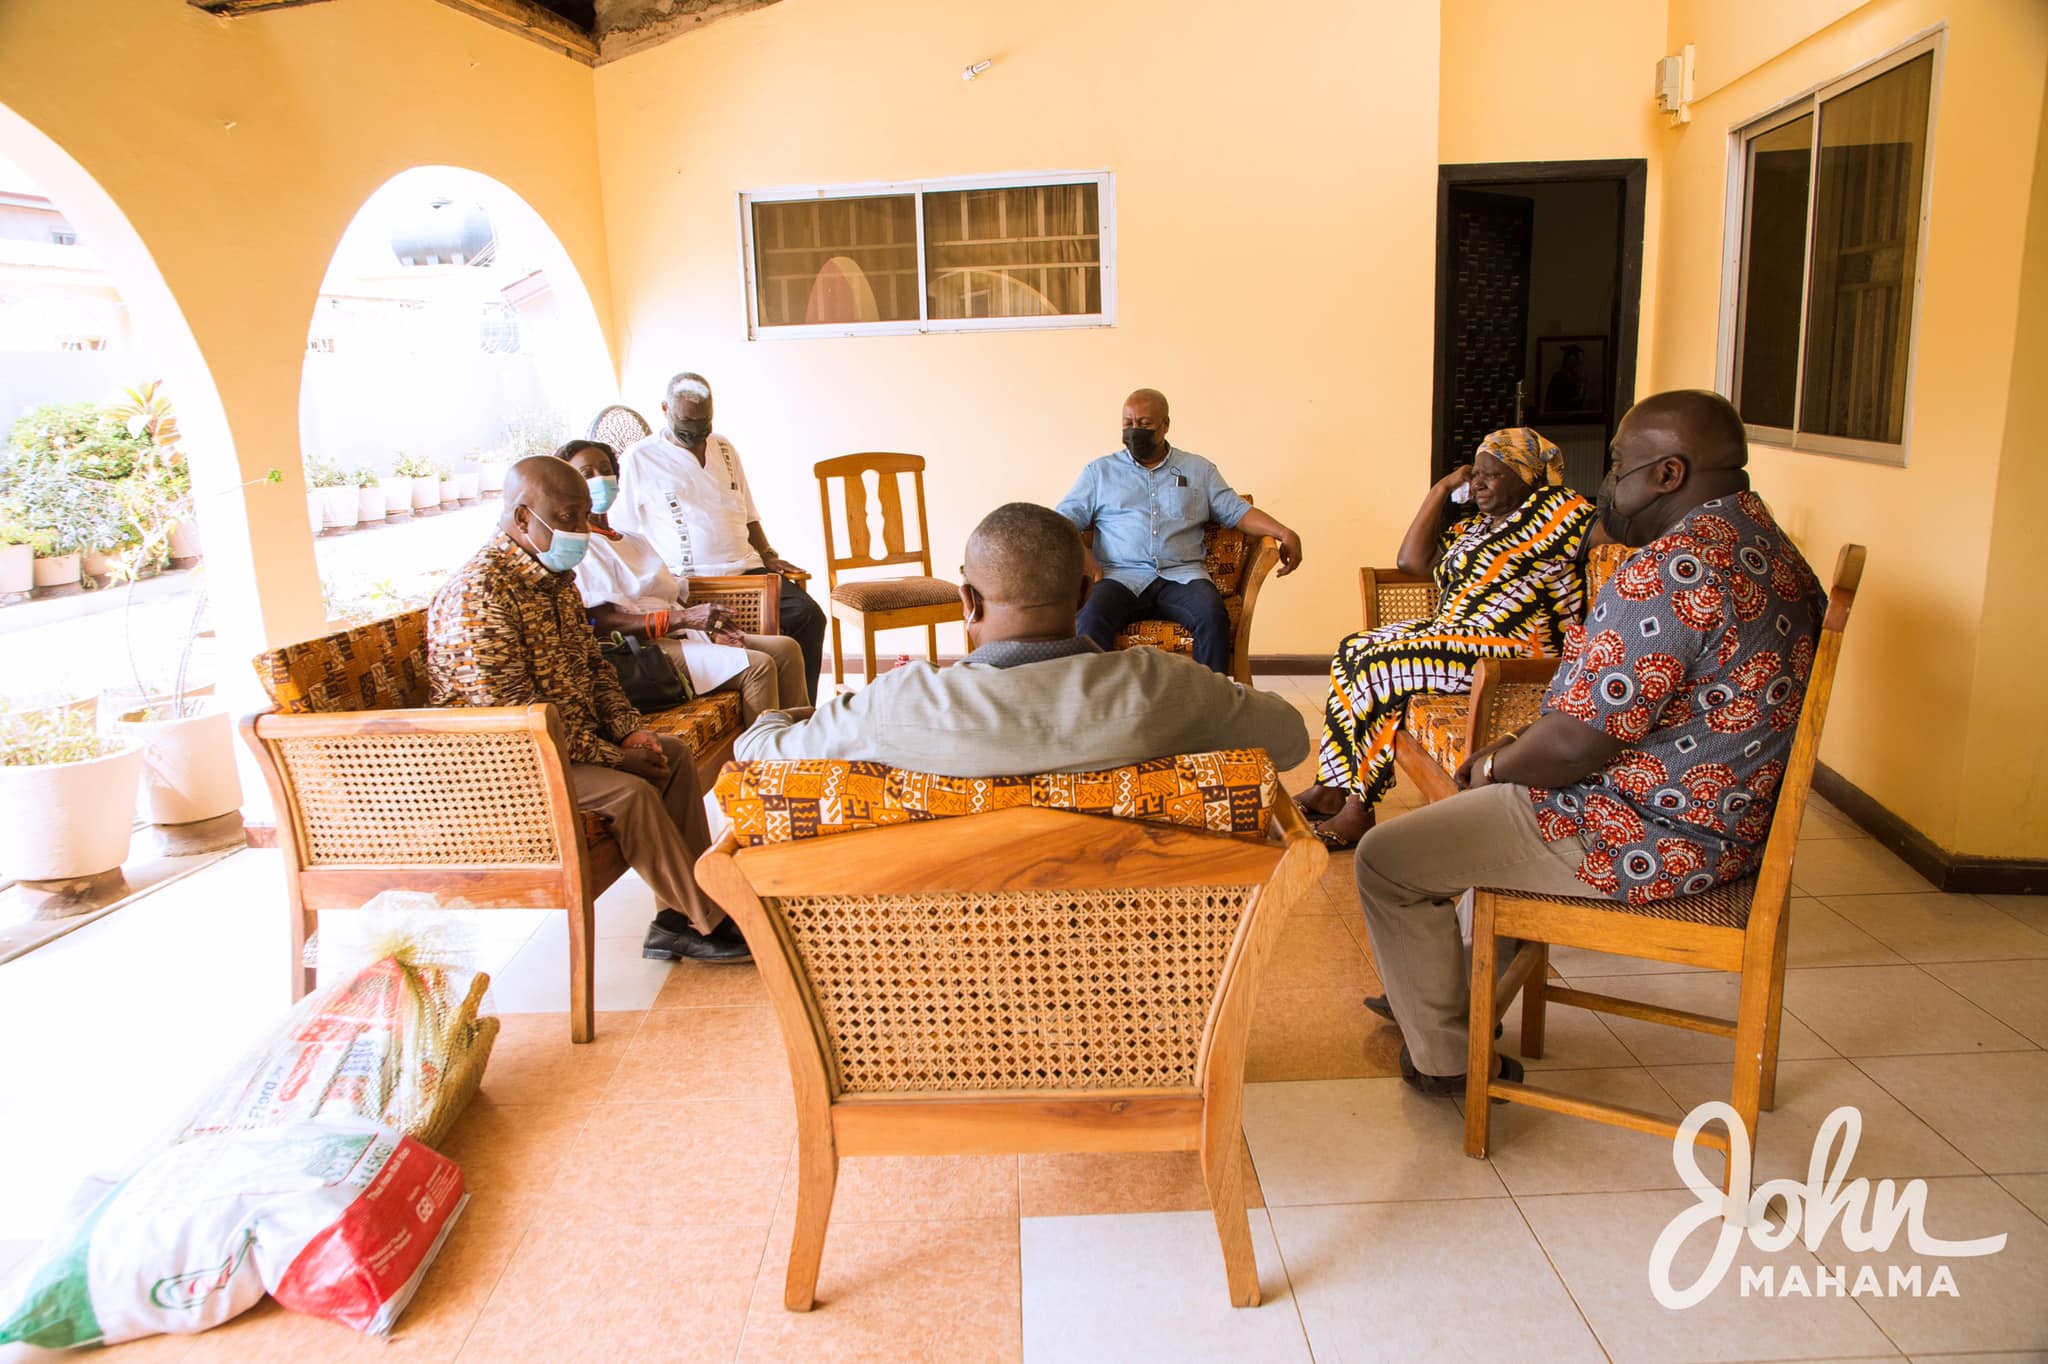 May be an image of 5 people, people sitting, indoor and text that says 'Gd John MAHAMA'